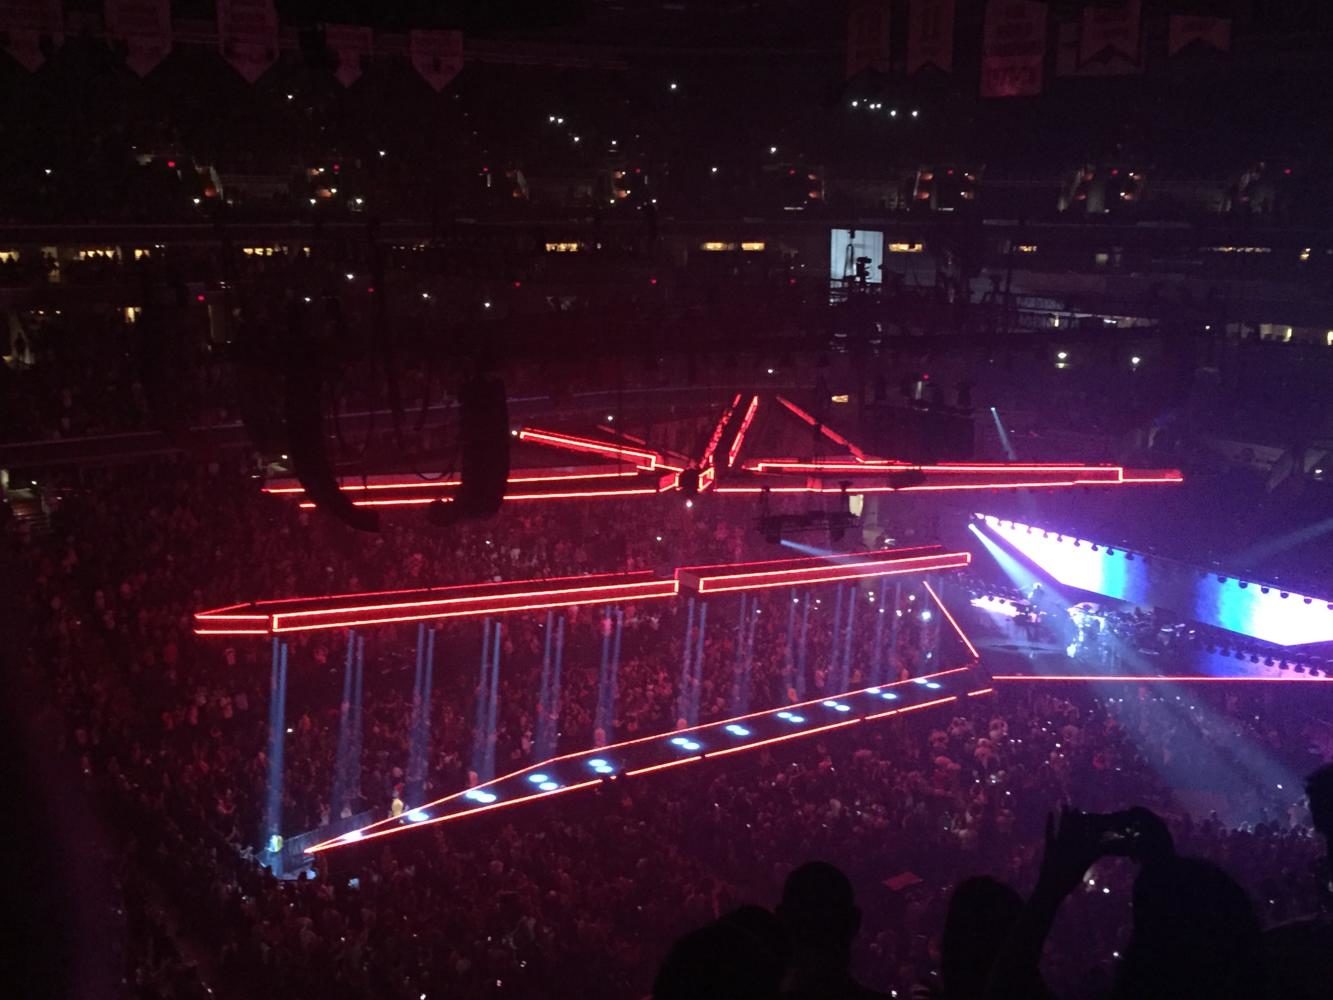 The Weeknd performed on May 18 at the Verizon Center. The fully-packed arena appreciated the complexity of the set, including the starship featured above. (Photo by Siddarth Shankar)